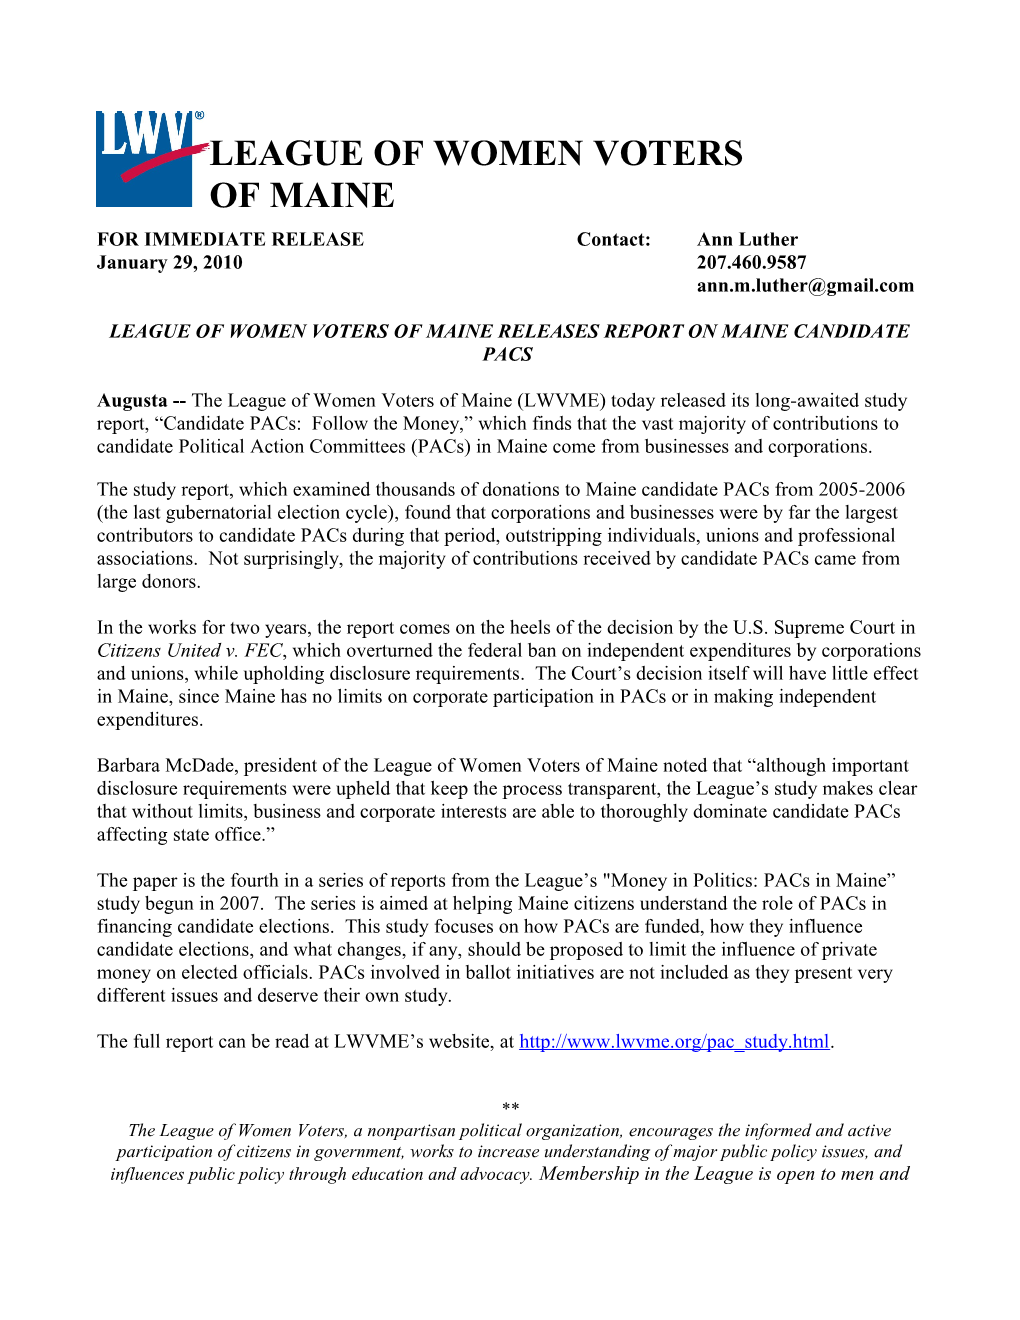 Attached Is a Copy of the LWVUS Amicus Curiae ( Friend-Of-The-Court ) Brief Filed on Tuesday